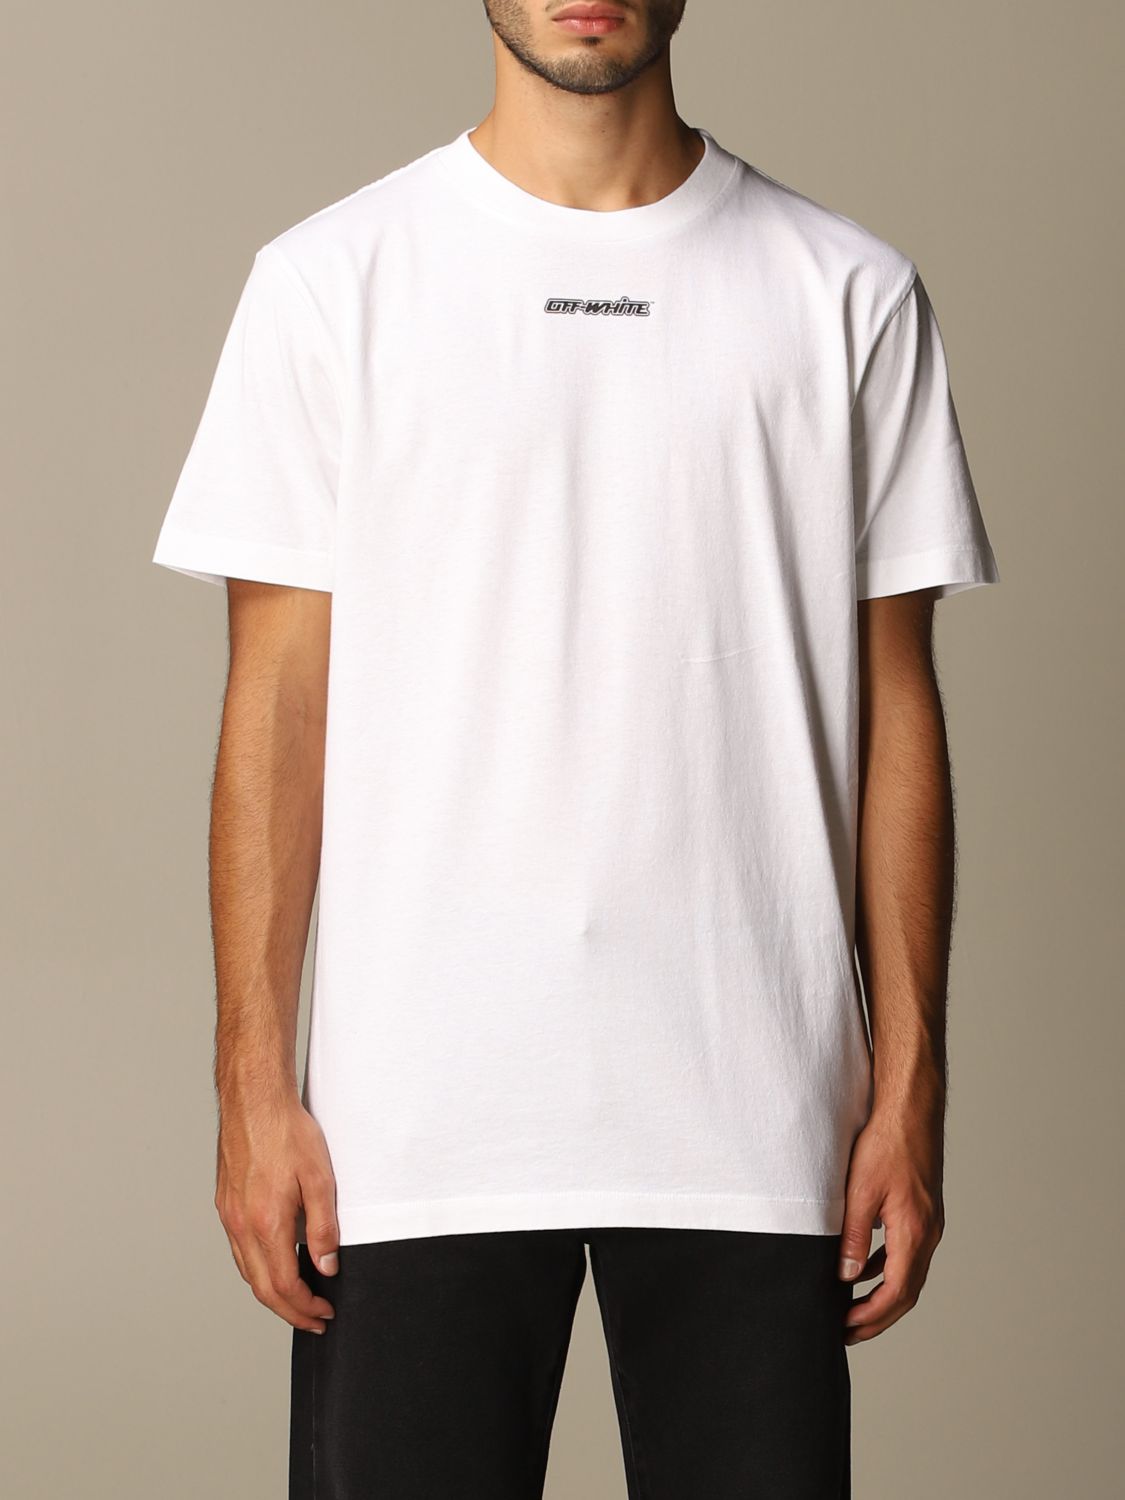 OFF WHITE: T-shirt with printed arrows | T-Shirt Off White Men White